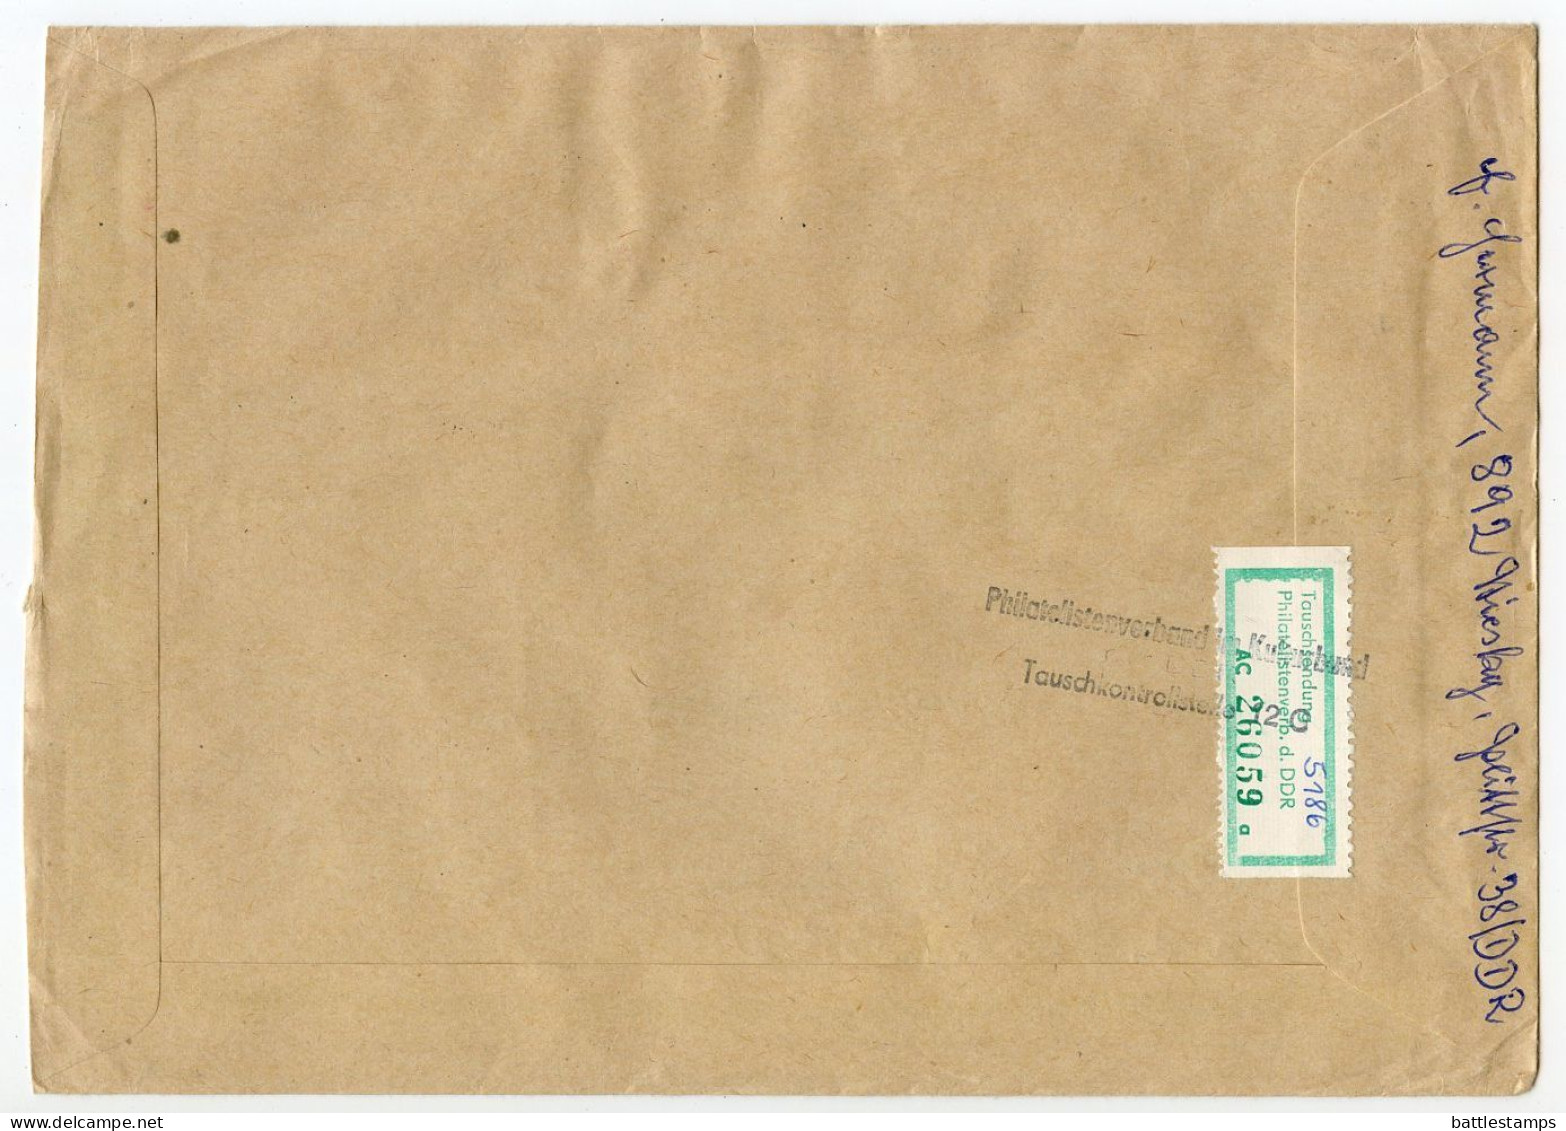 Germany East 1979 Registered Cover; Görlitz To Vienenburg; Circus & Other Stamps; Tauschsendung (Exchange Control) Label - Lettres & Documents